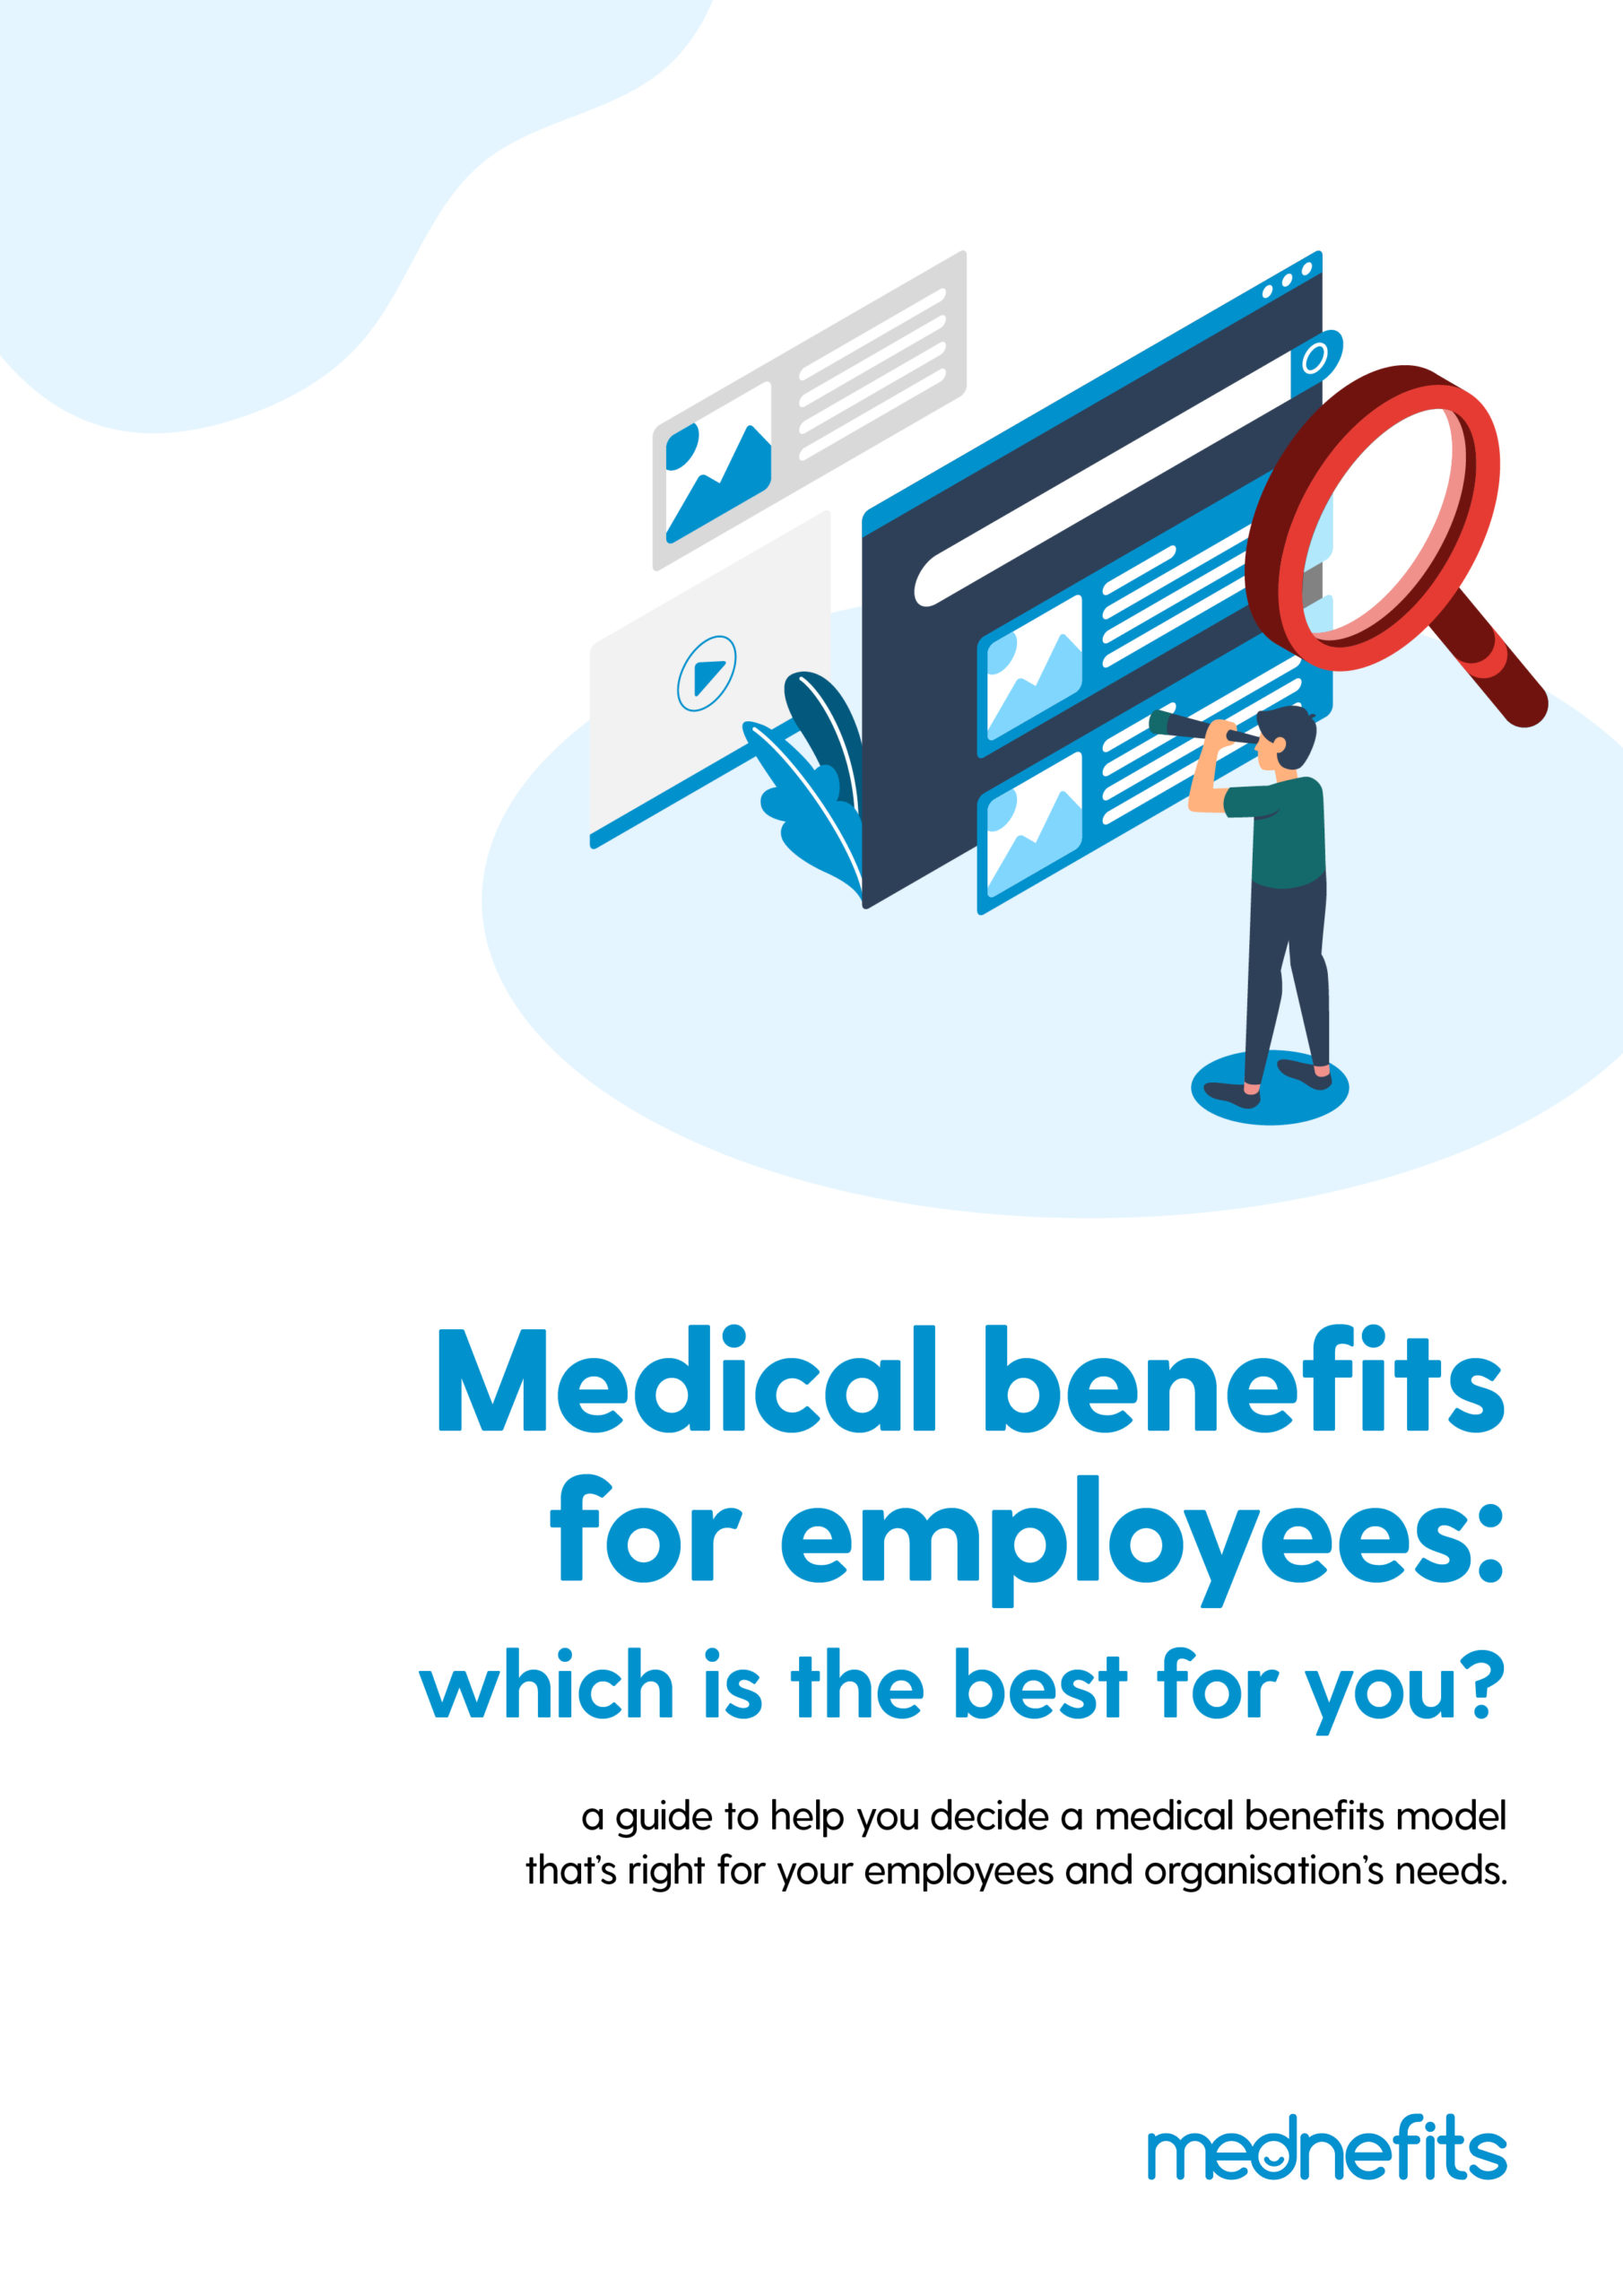 E-book guide: Medical benefits for employees